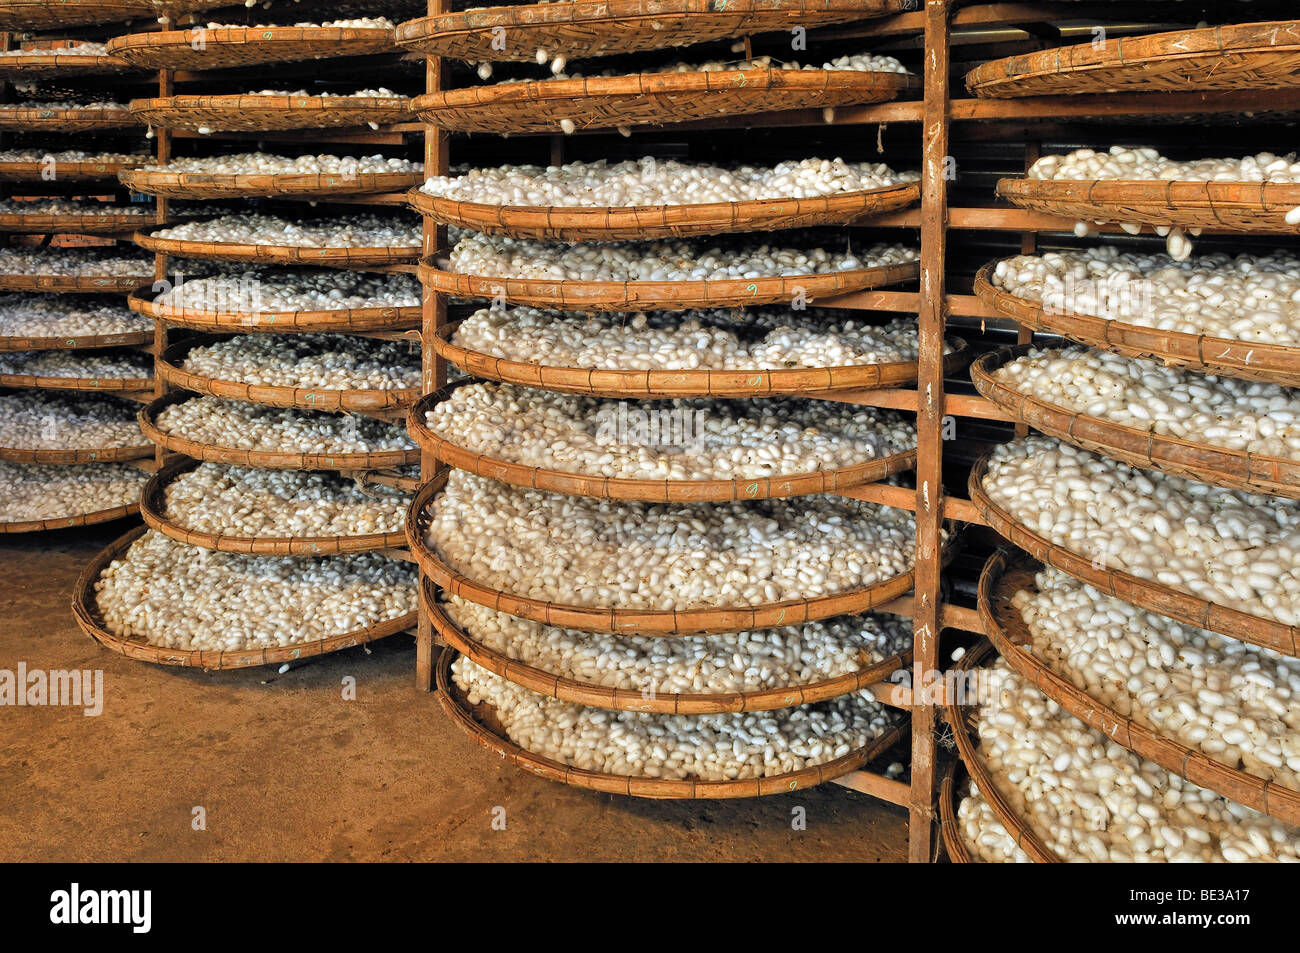 Baskets full of silkworm cocoons in a silk factory, v Stock Photo